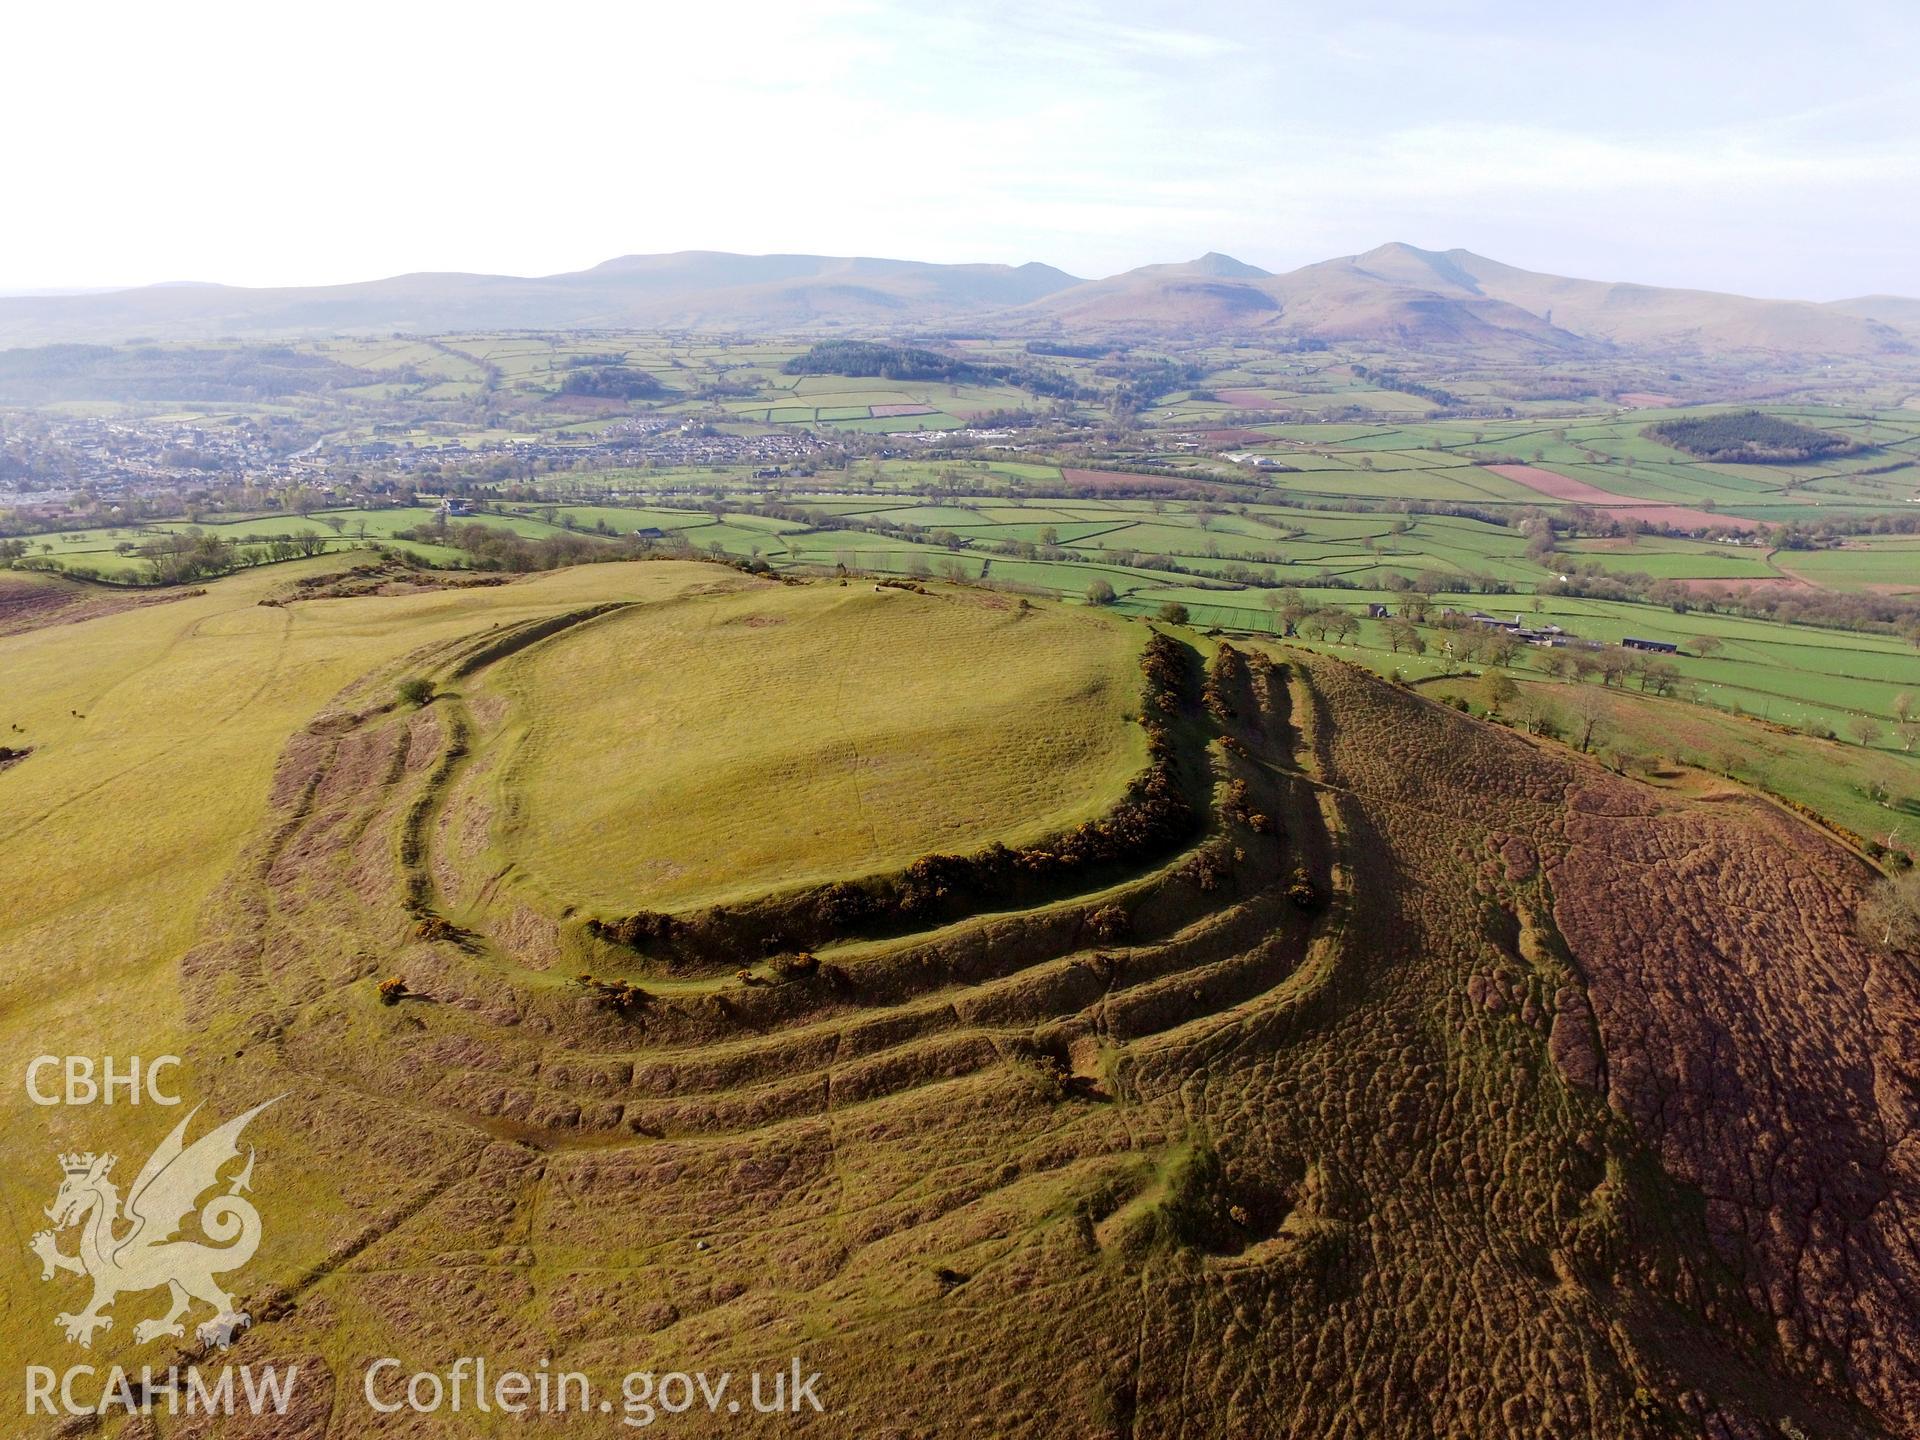 Colour aerial photo showing Pen y Crug, taken by Paul R. Davis,  5th May 2016.